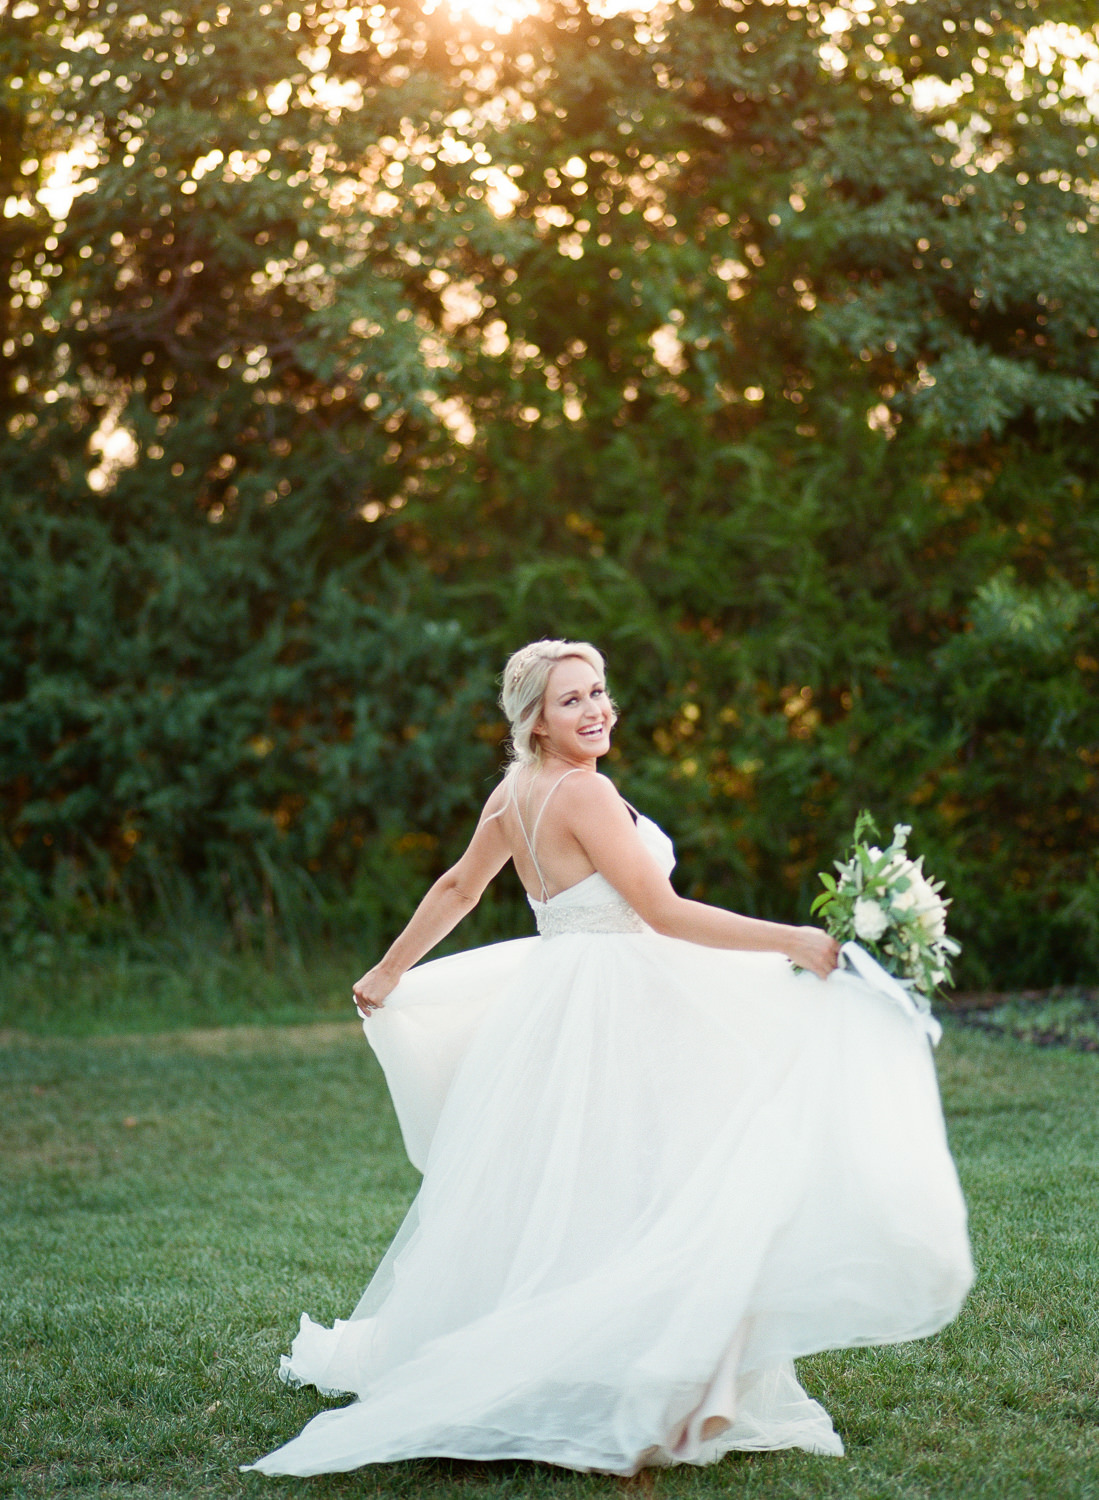 St. Louis bridal session at sunset, Norman's Bridal